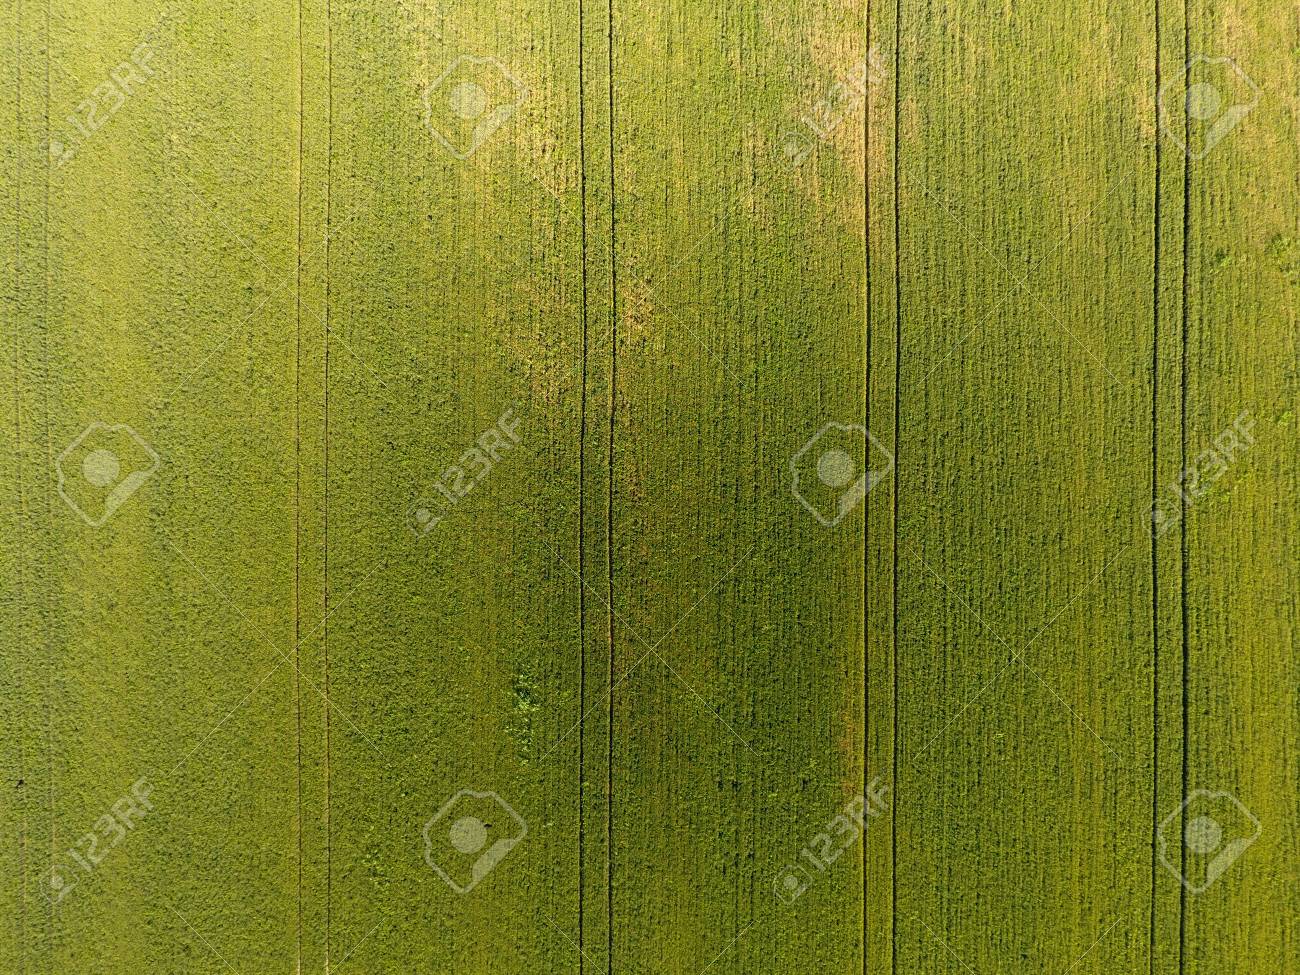 Texture Of Wheat Field Background Young Green On The